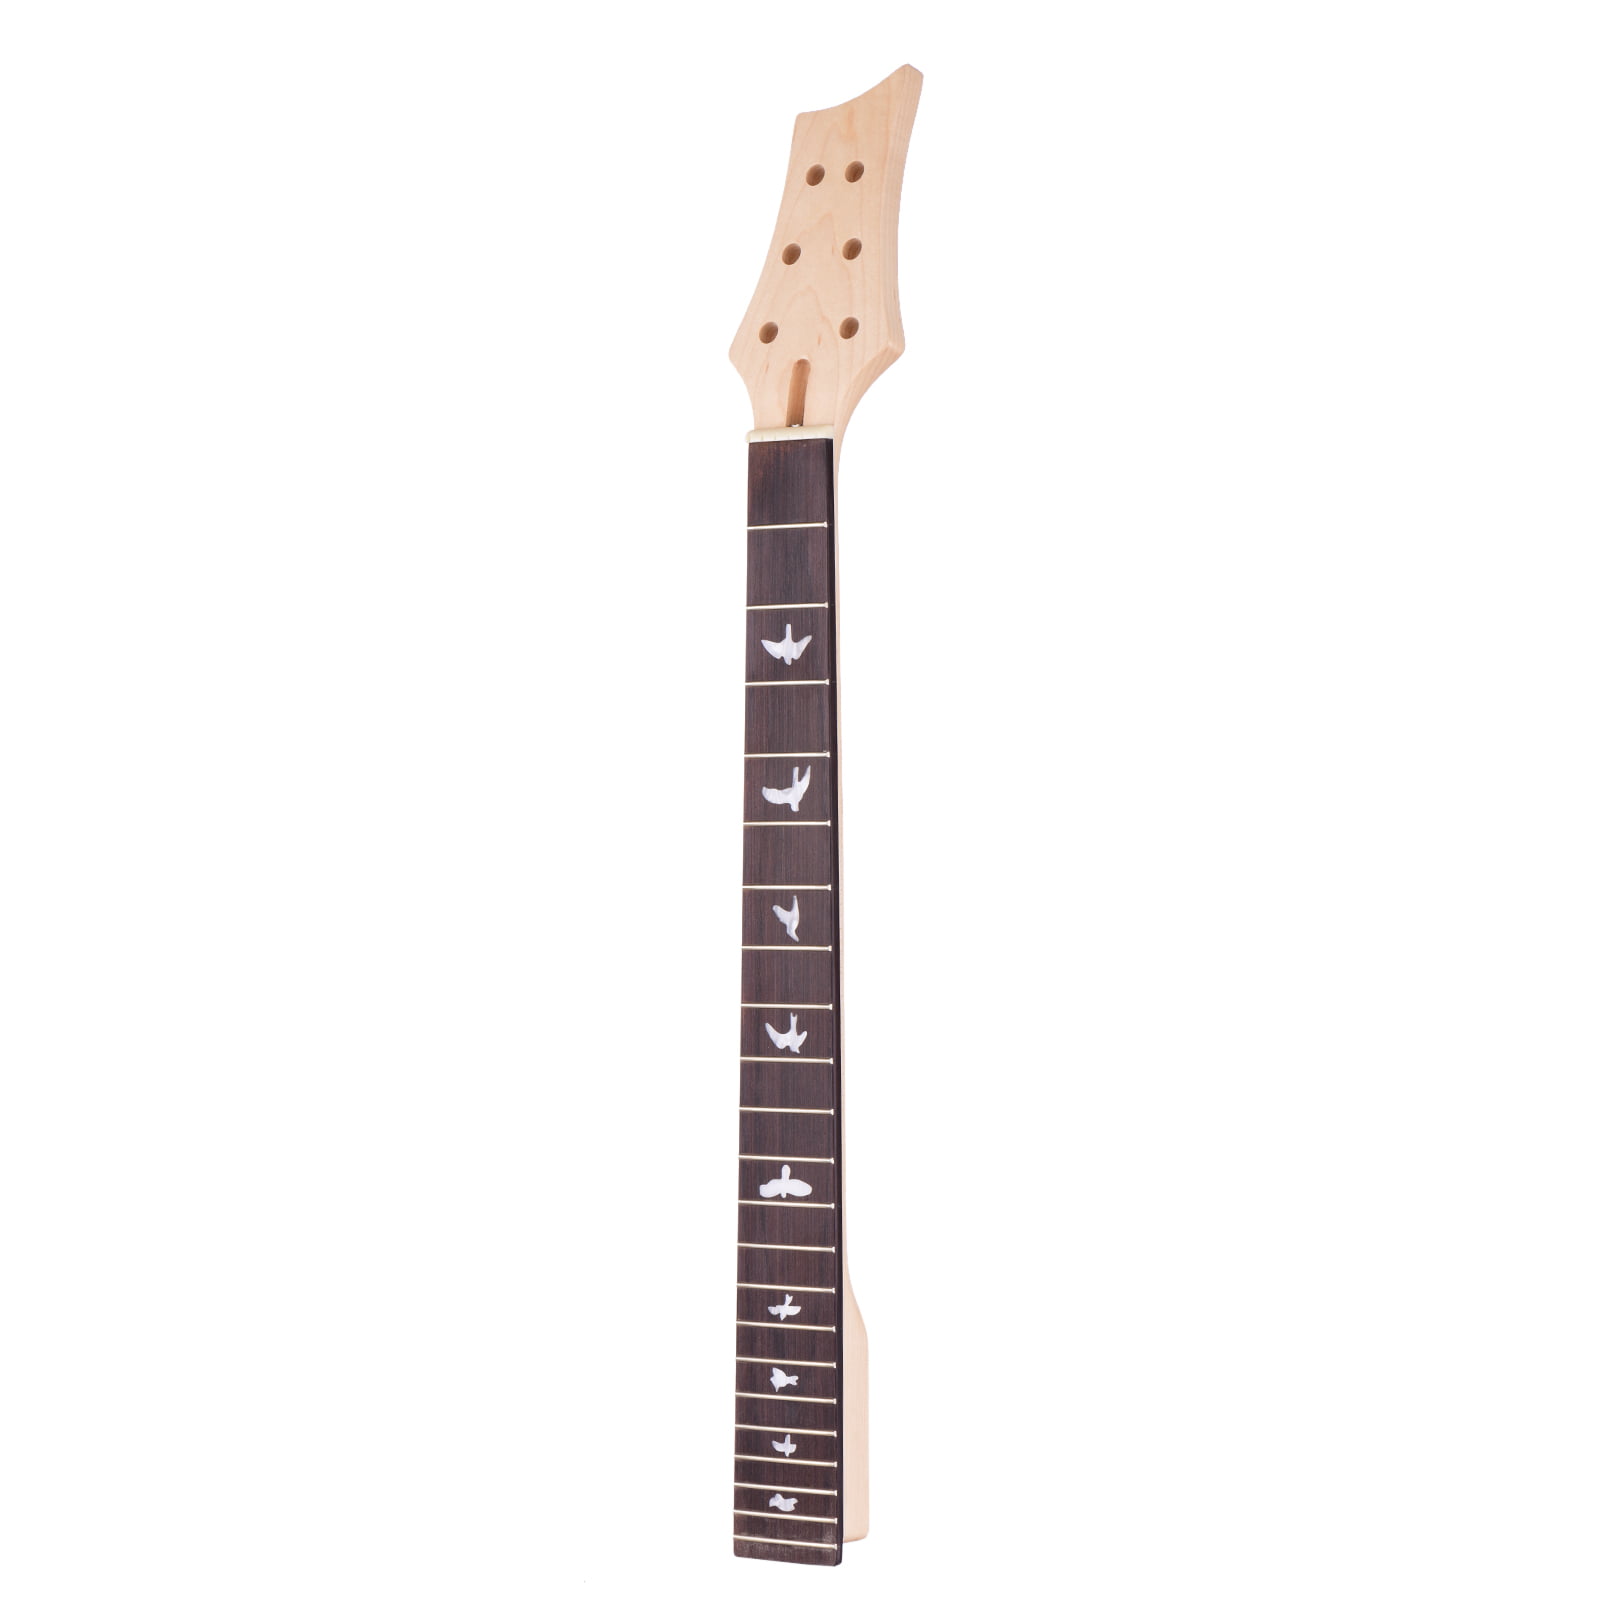 ABMBERTK Universal Unfinished Electric Guitar Neck 22 Frets Maple Wood Fingerboard with White Birds Inlay Replacement,Wood